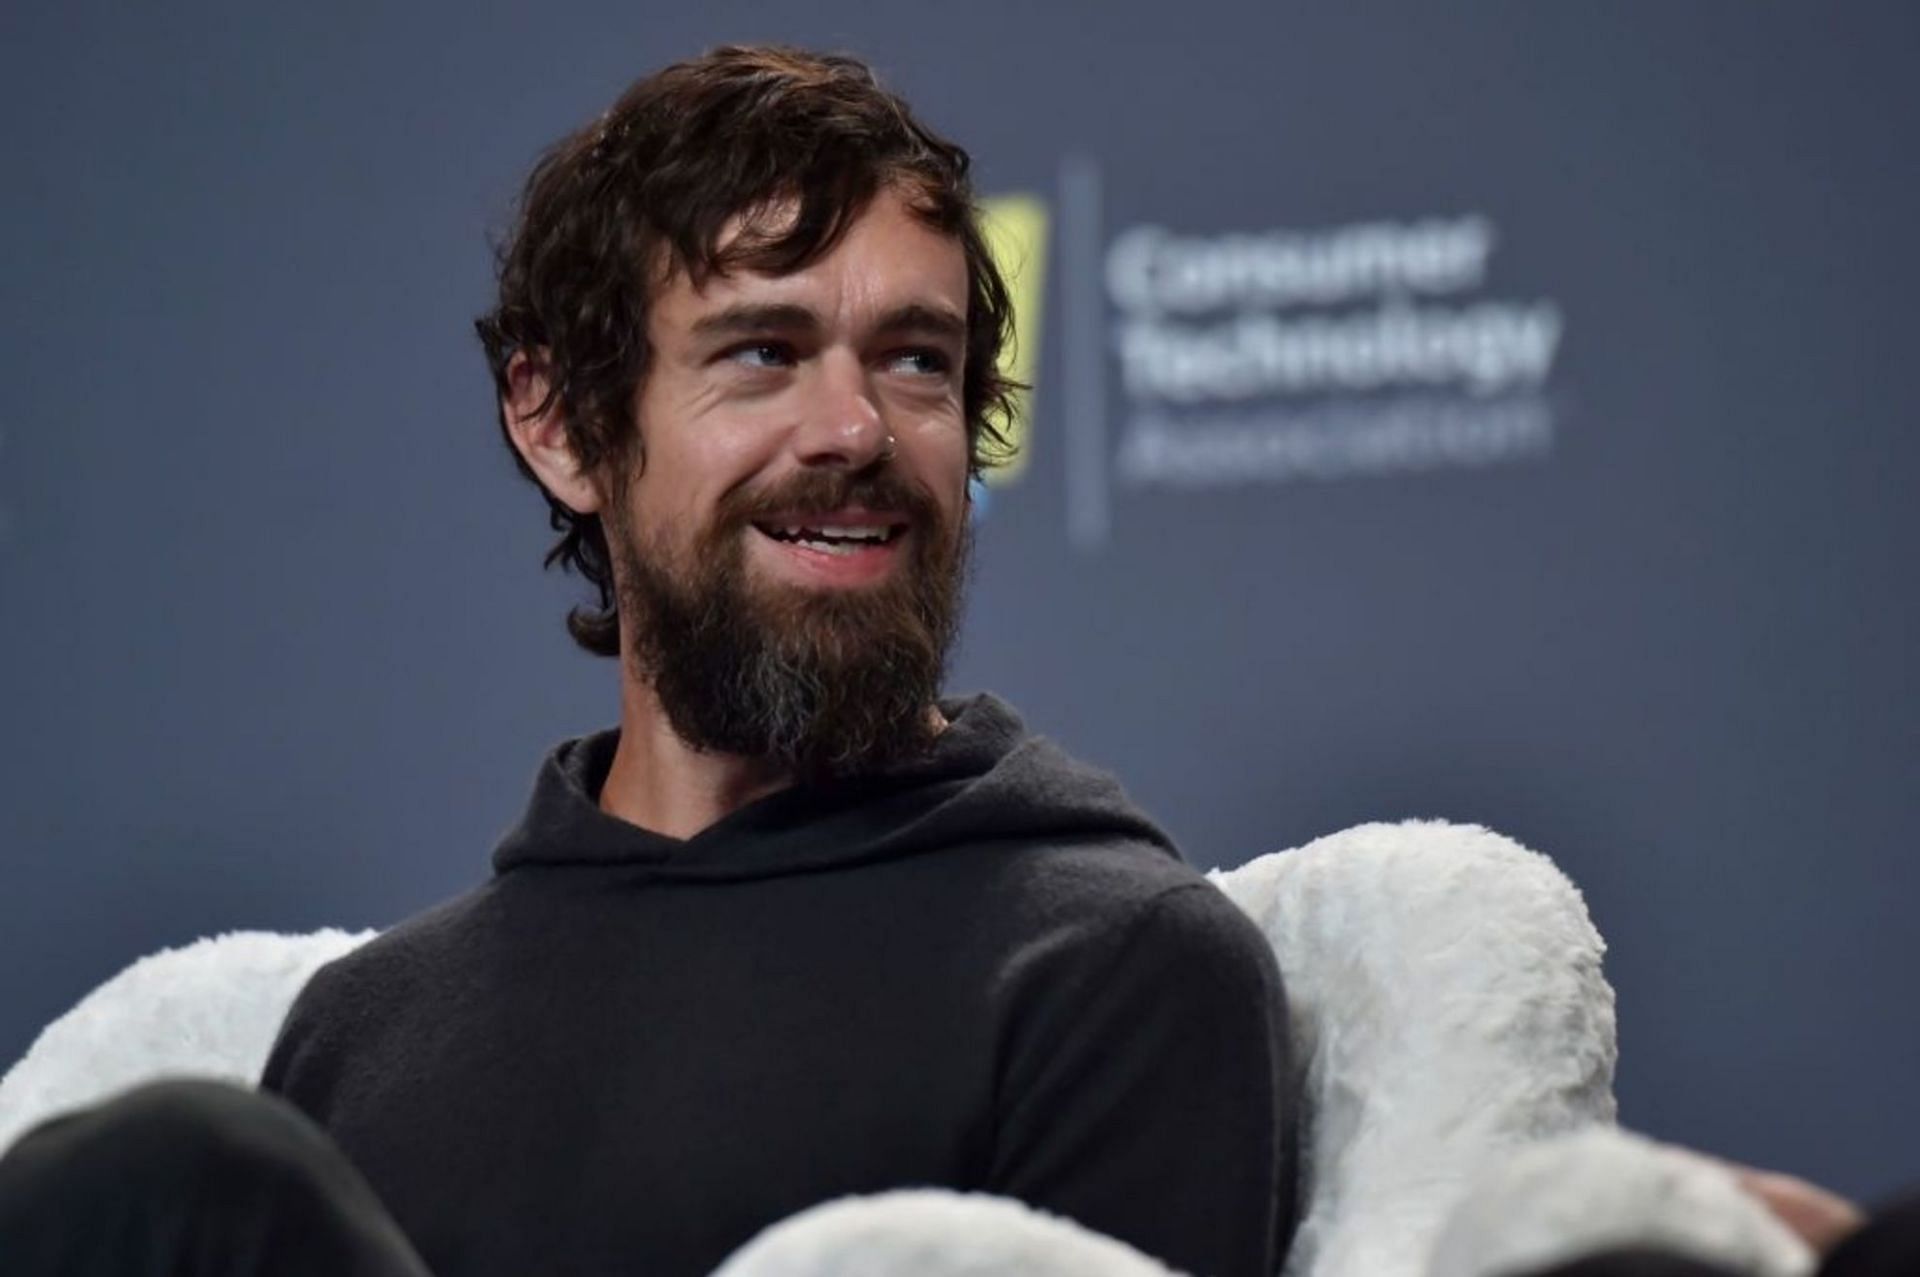 Jack Dorsey has quit as Twitter CEO (Image via David Becker/Getty Images)